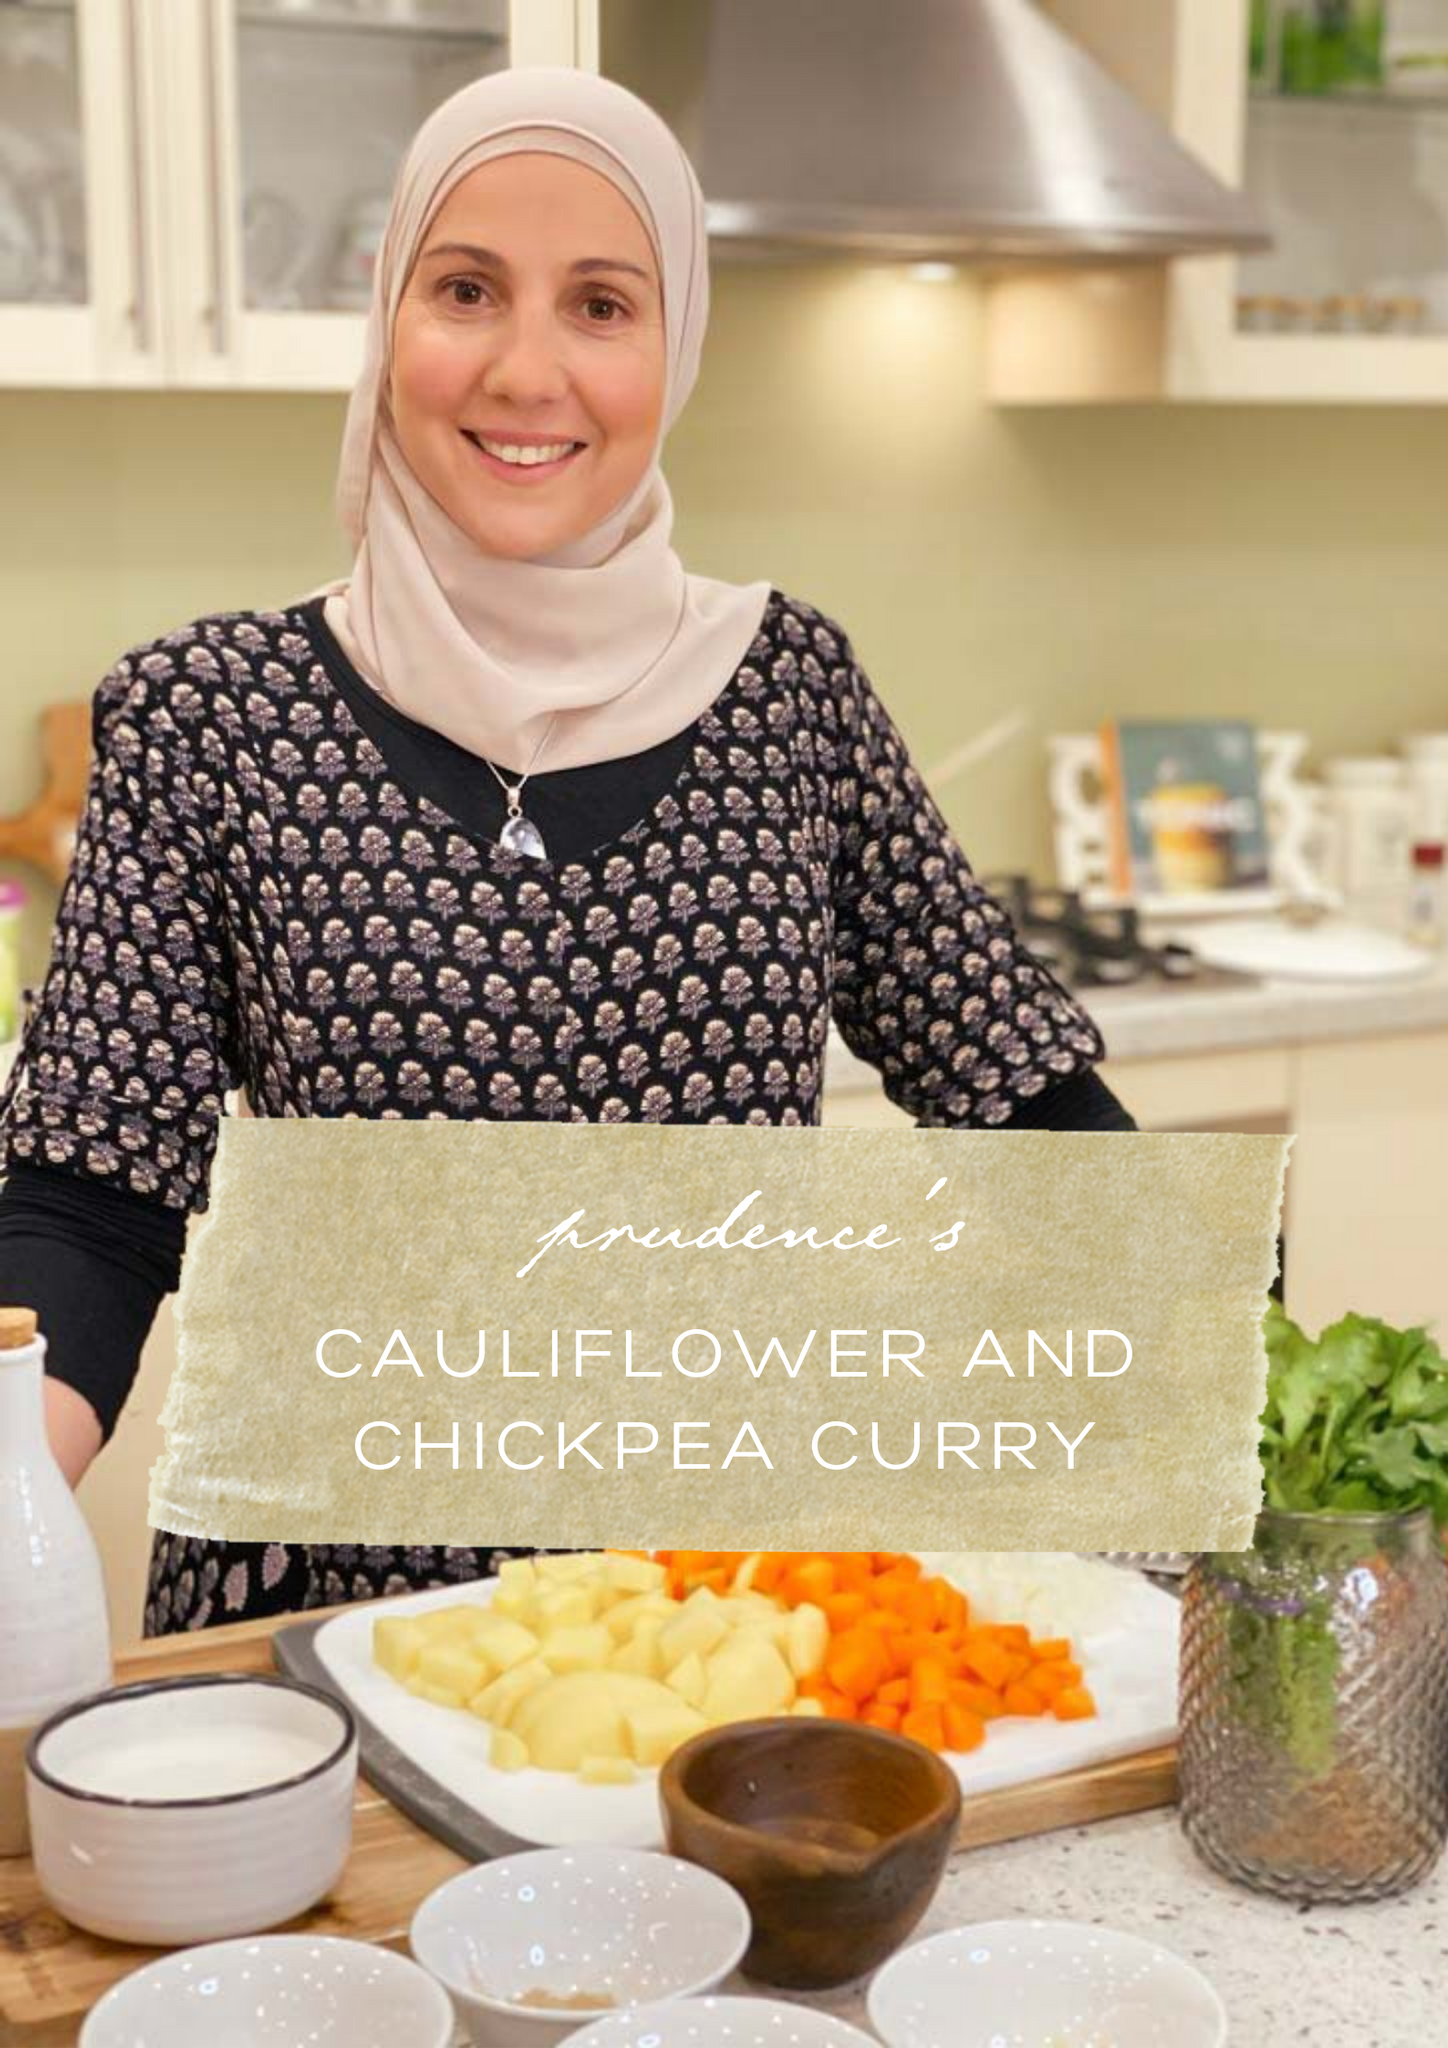 Prudence's Cauliflower and Chickpea Curry